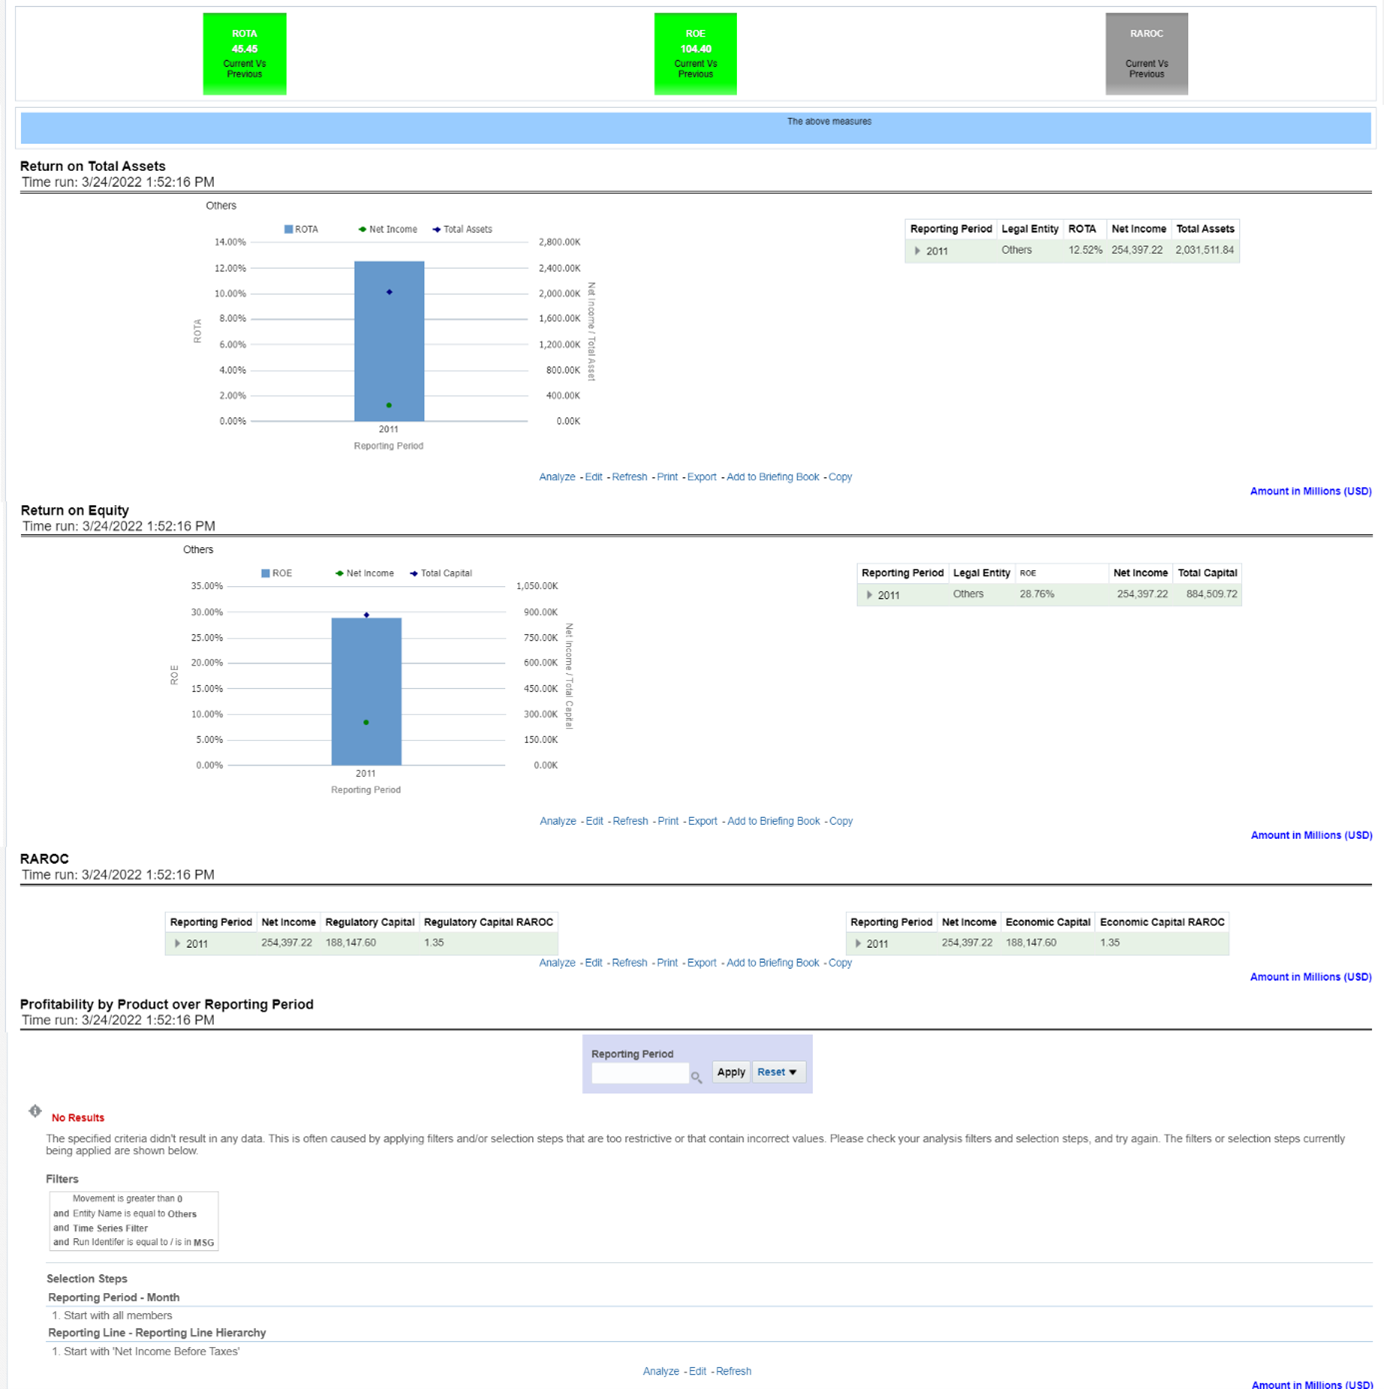 The Management Reporting - Performance Measures - Performance Measures Report displays the Report of Total Assets, on Equity, RAROC, and Profitability by Product over Reporting Period in graphcial and tabular formats.